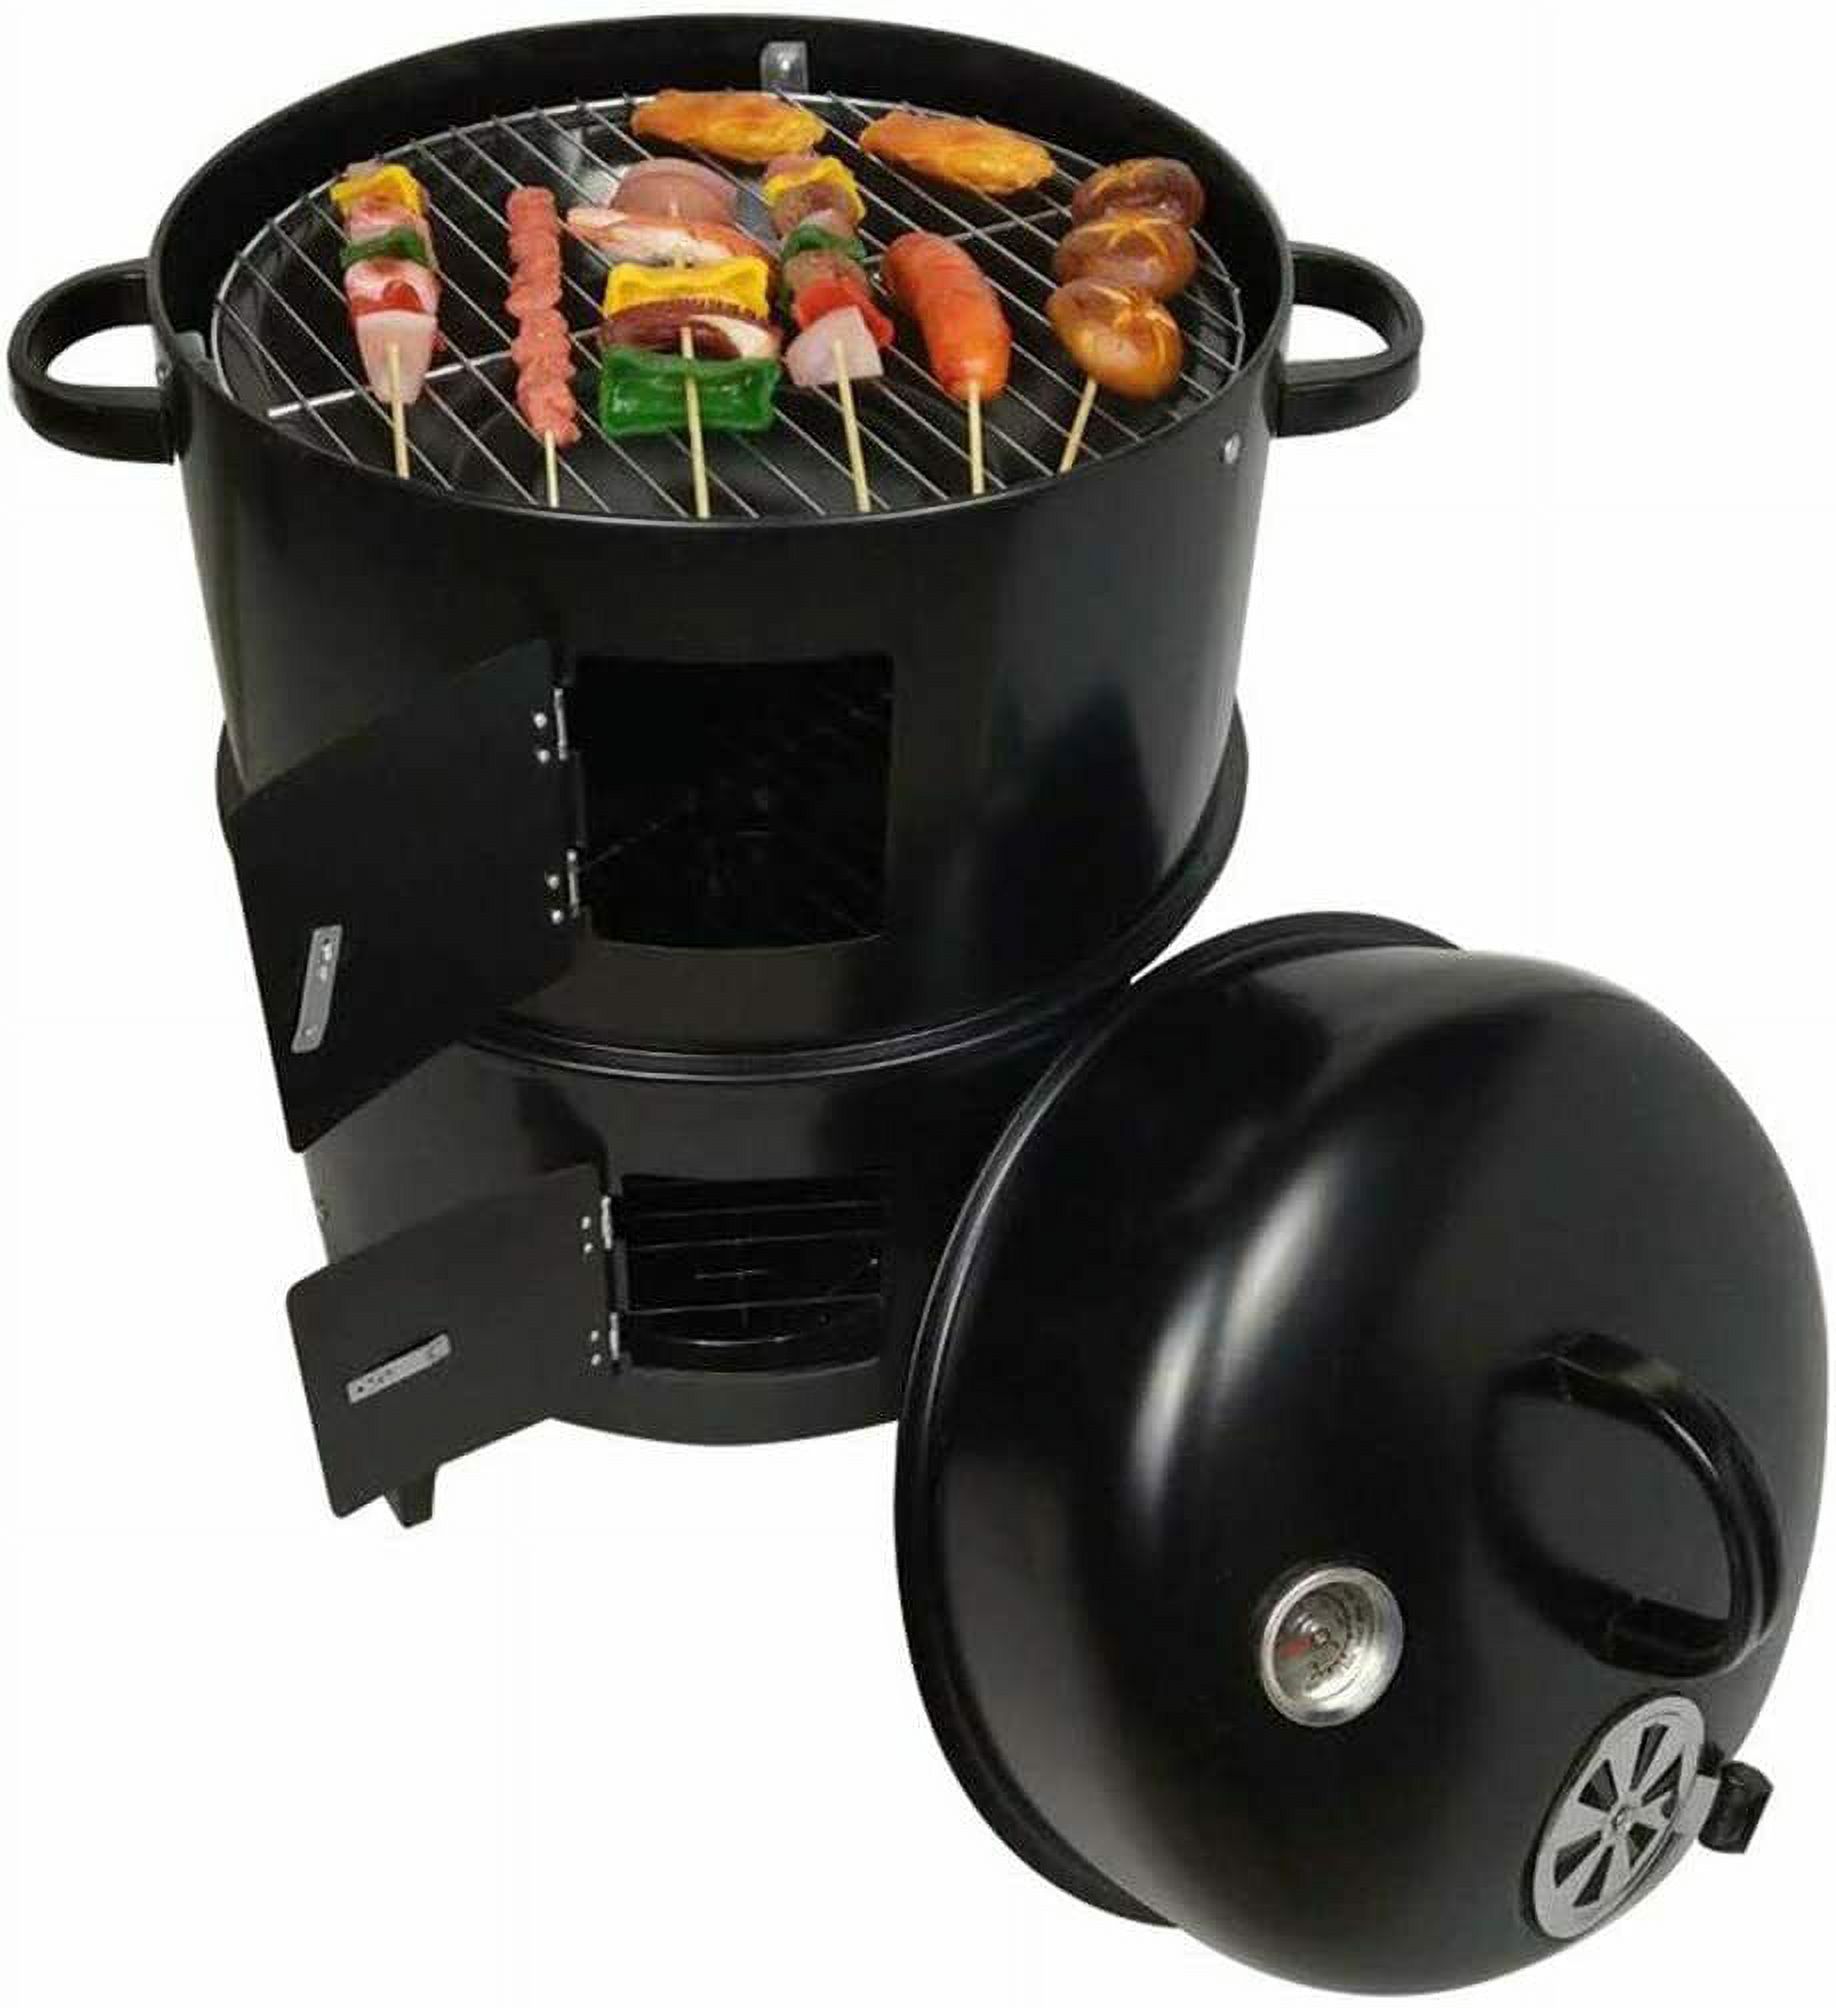 LELINTA Vertical Charcoal BBQ Smoker, 3-in-1 Vertical Offset Charcoal Smoker & Grill Steel BBQ Grill - Built in Thermometer & Adjustable Air Vent for Outdoor Picnic, Camping - image 3 of 8